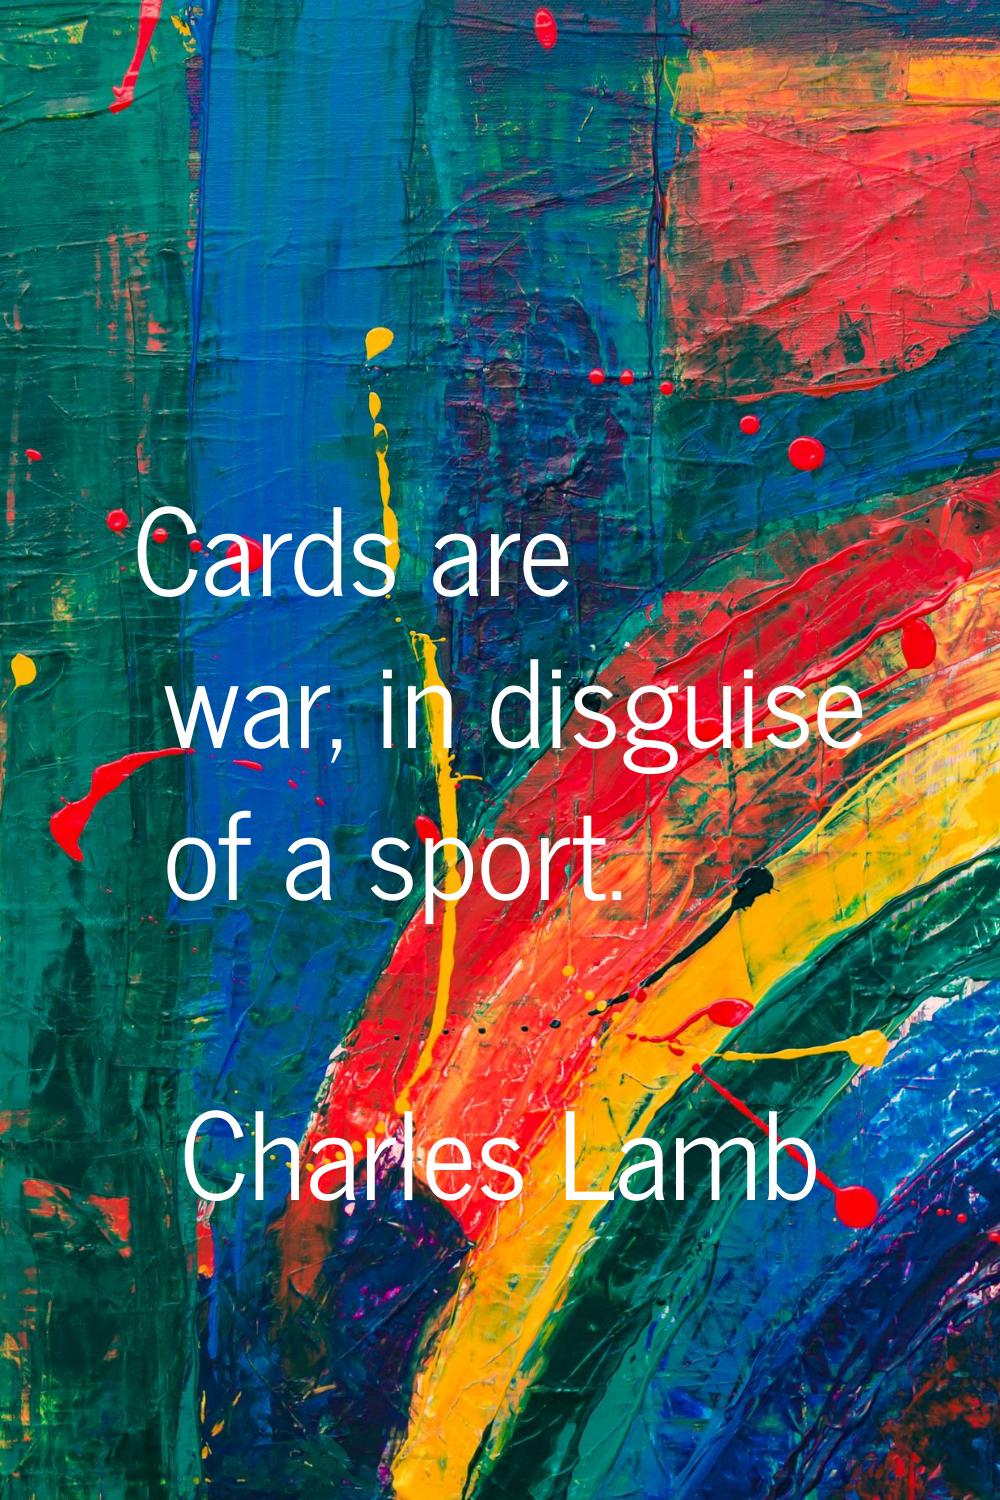 Cards are war, in disguise of a sport.